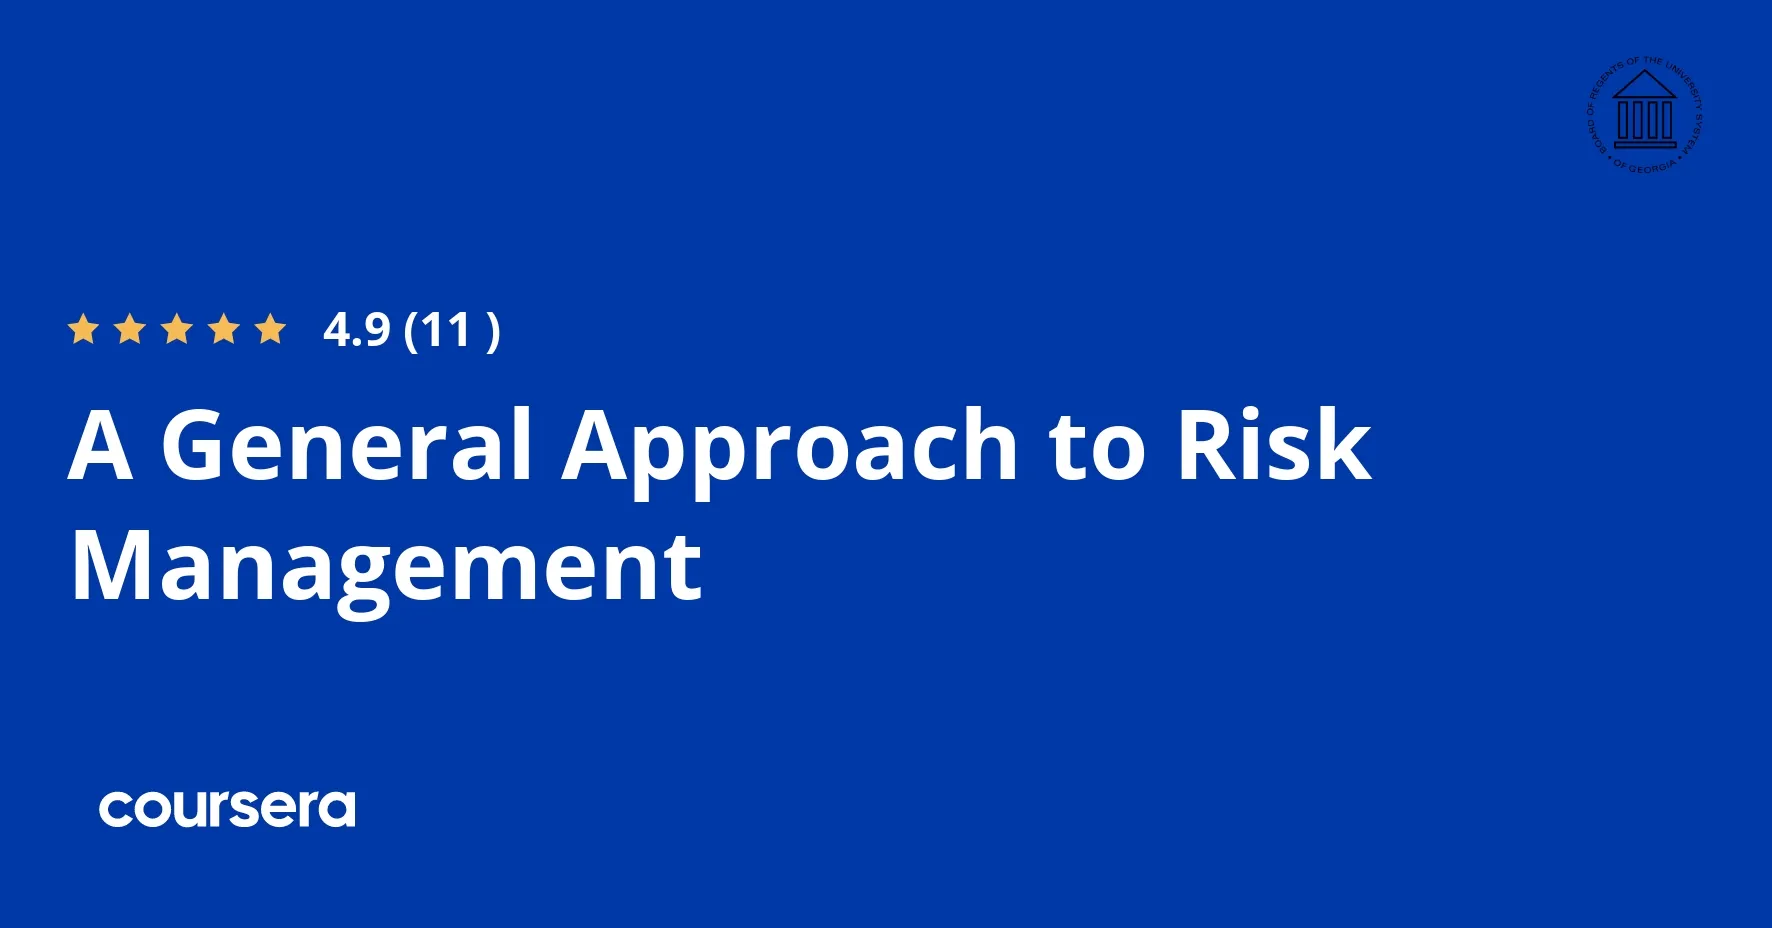 A General Approach to Risk Management